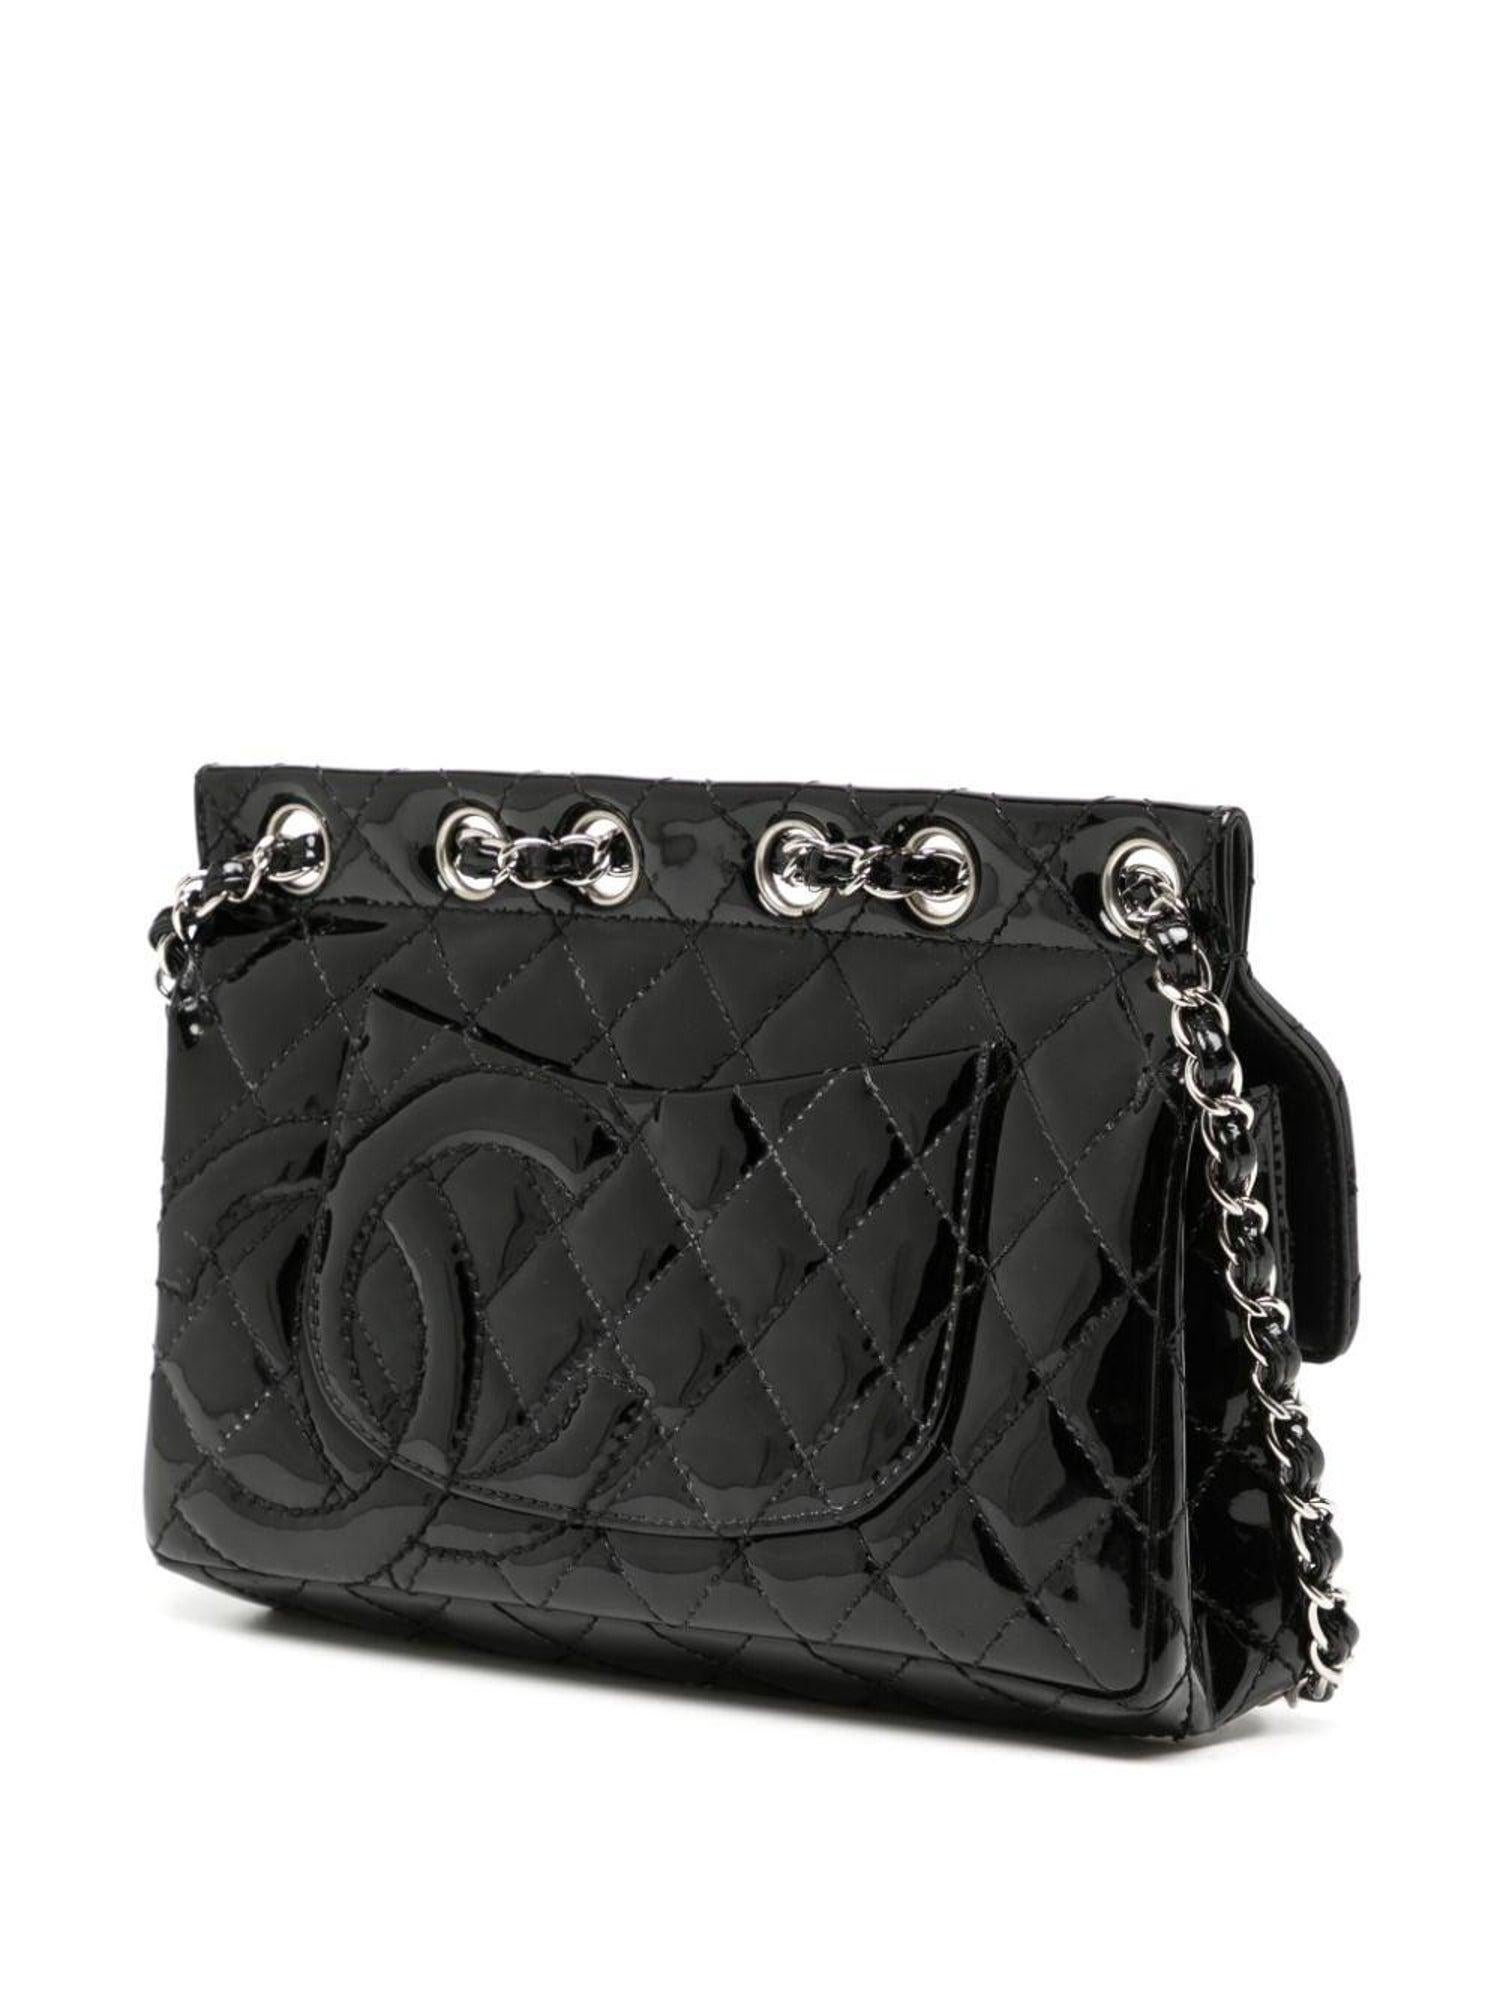 Chanel Classic Flap Supermodel Super Rare Quilted Black Patent Leather Bag For Sale 6